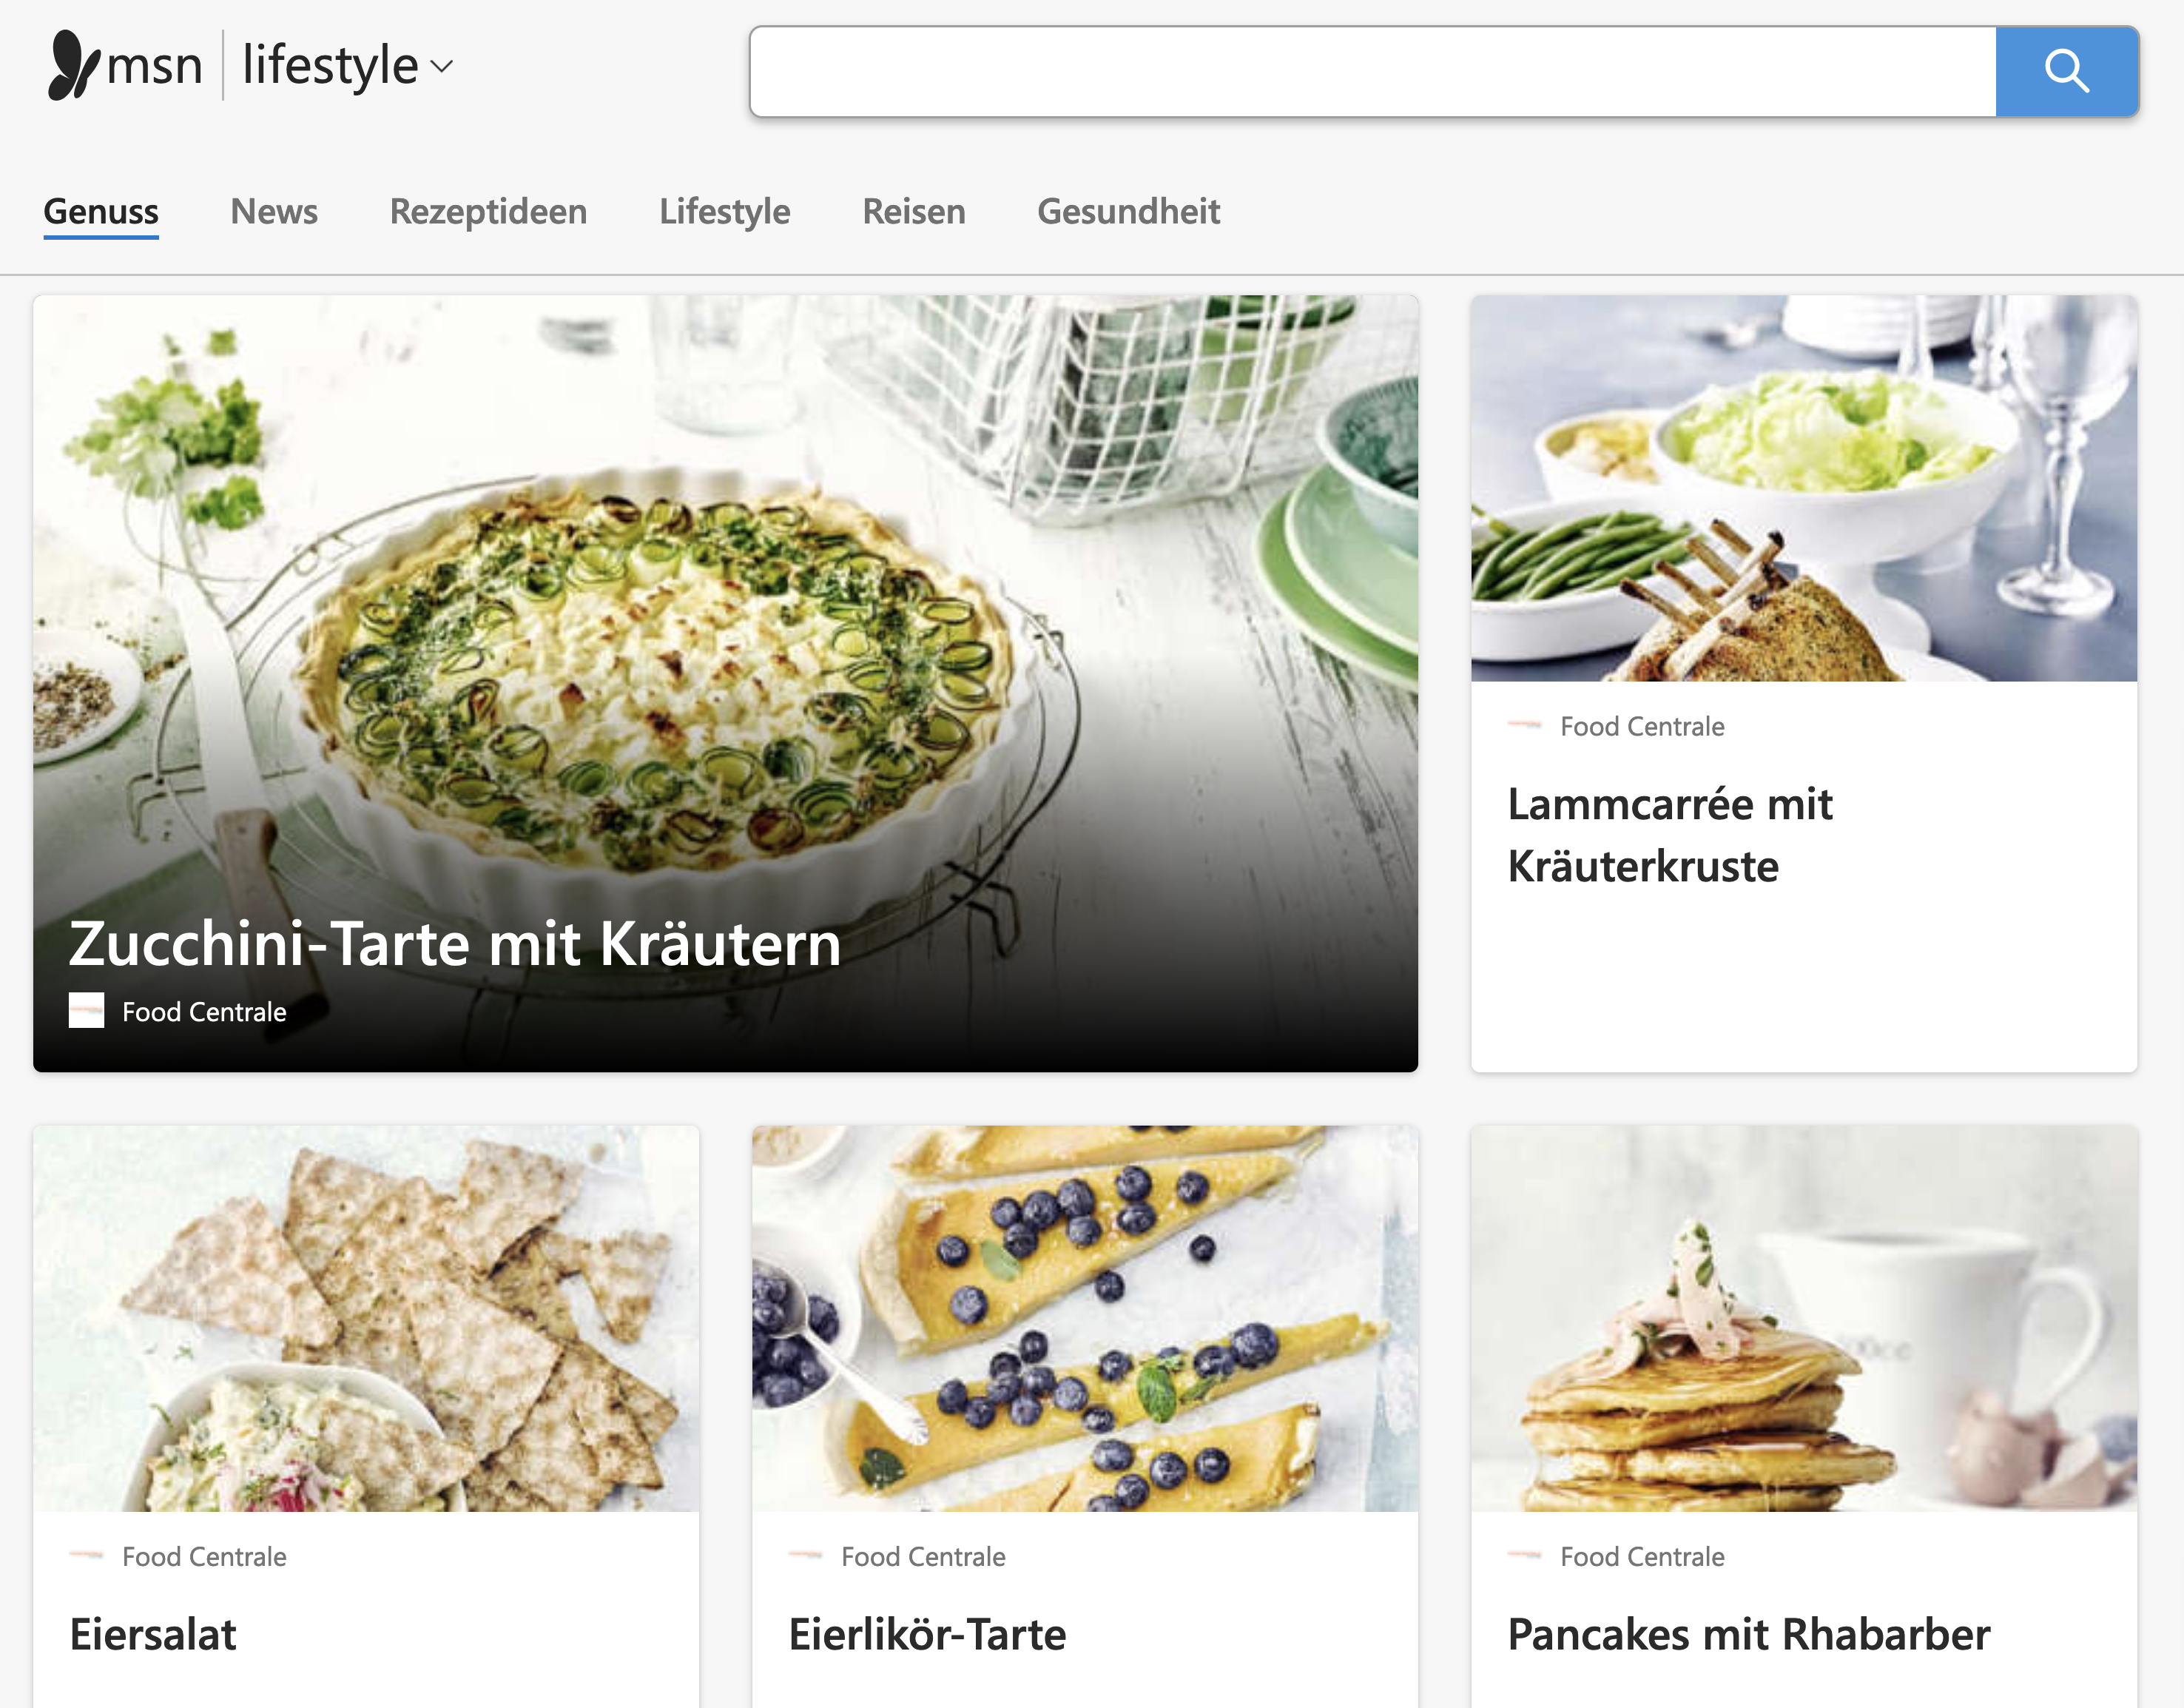 FoodCentrale launches online service with cooking recipes in German and English